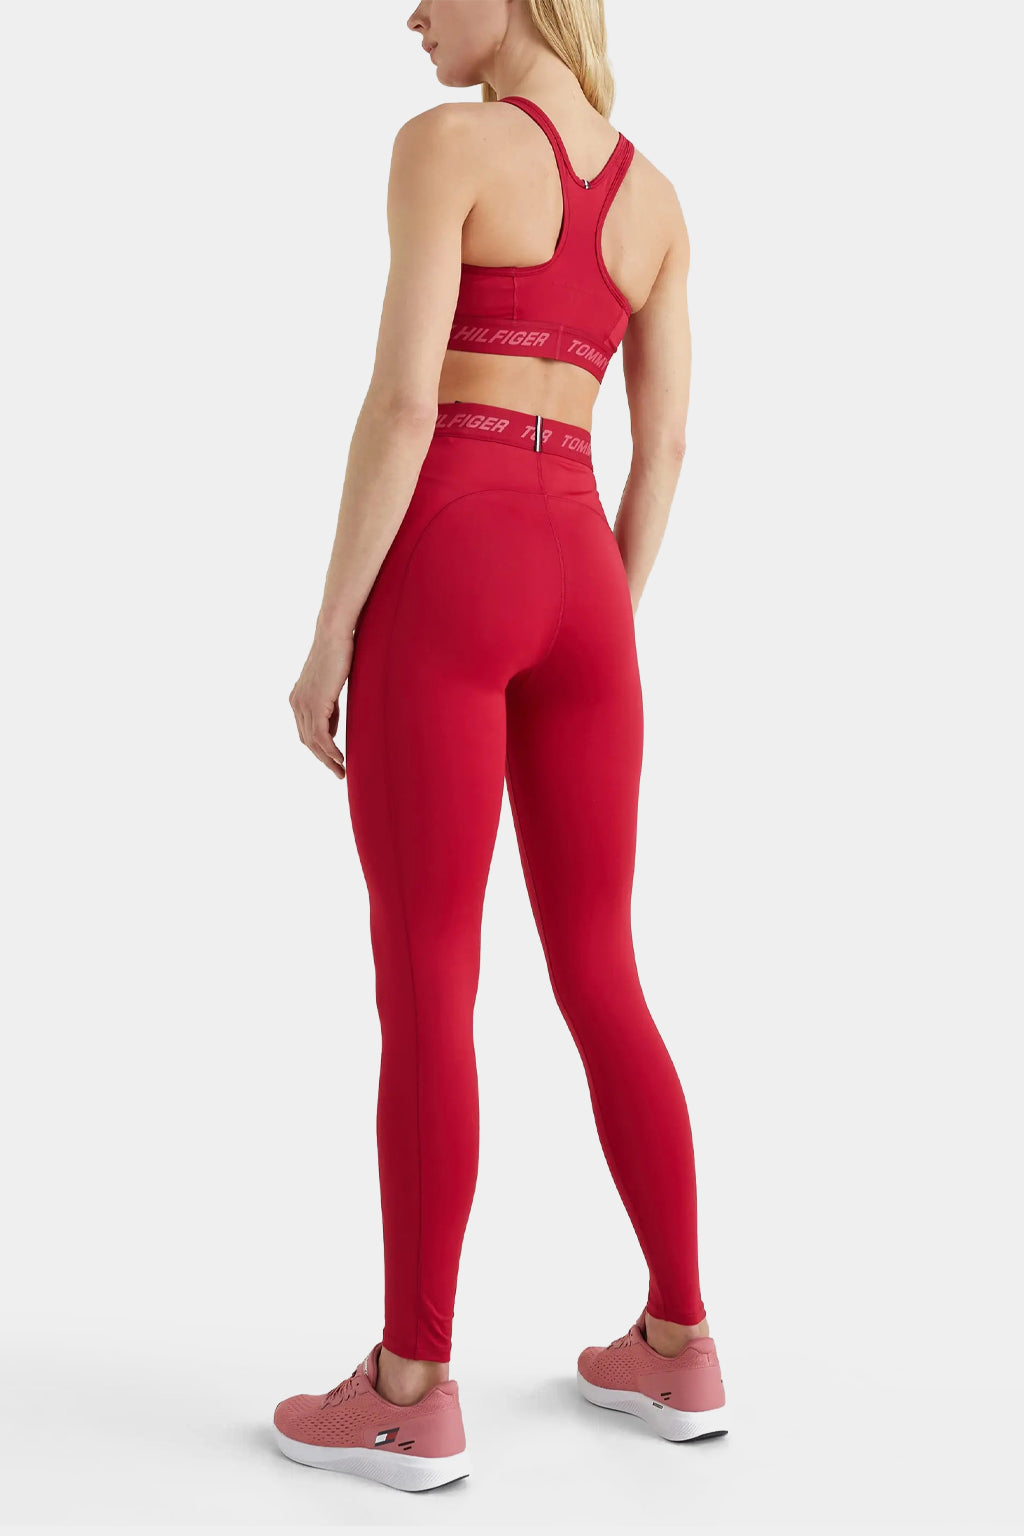 Tommy Hilfiger - Sport Long Leggings With High Rock and Logo